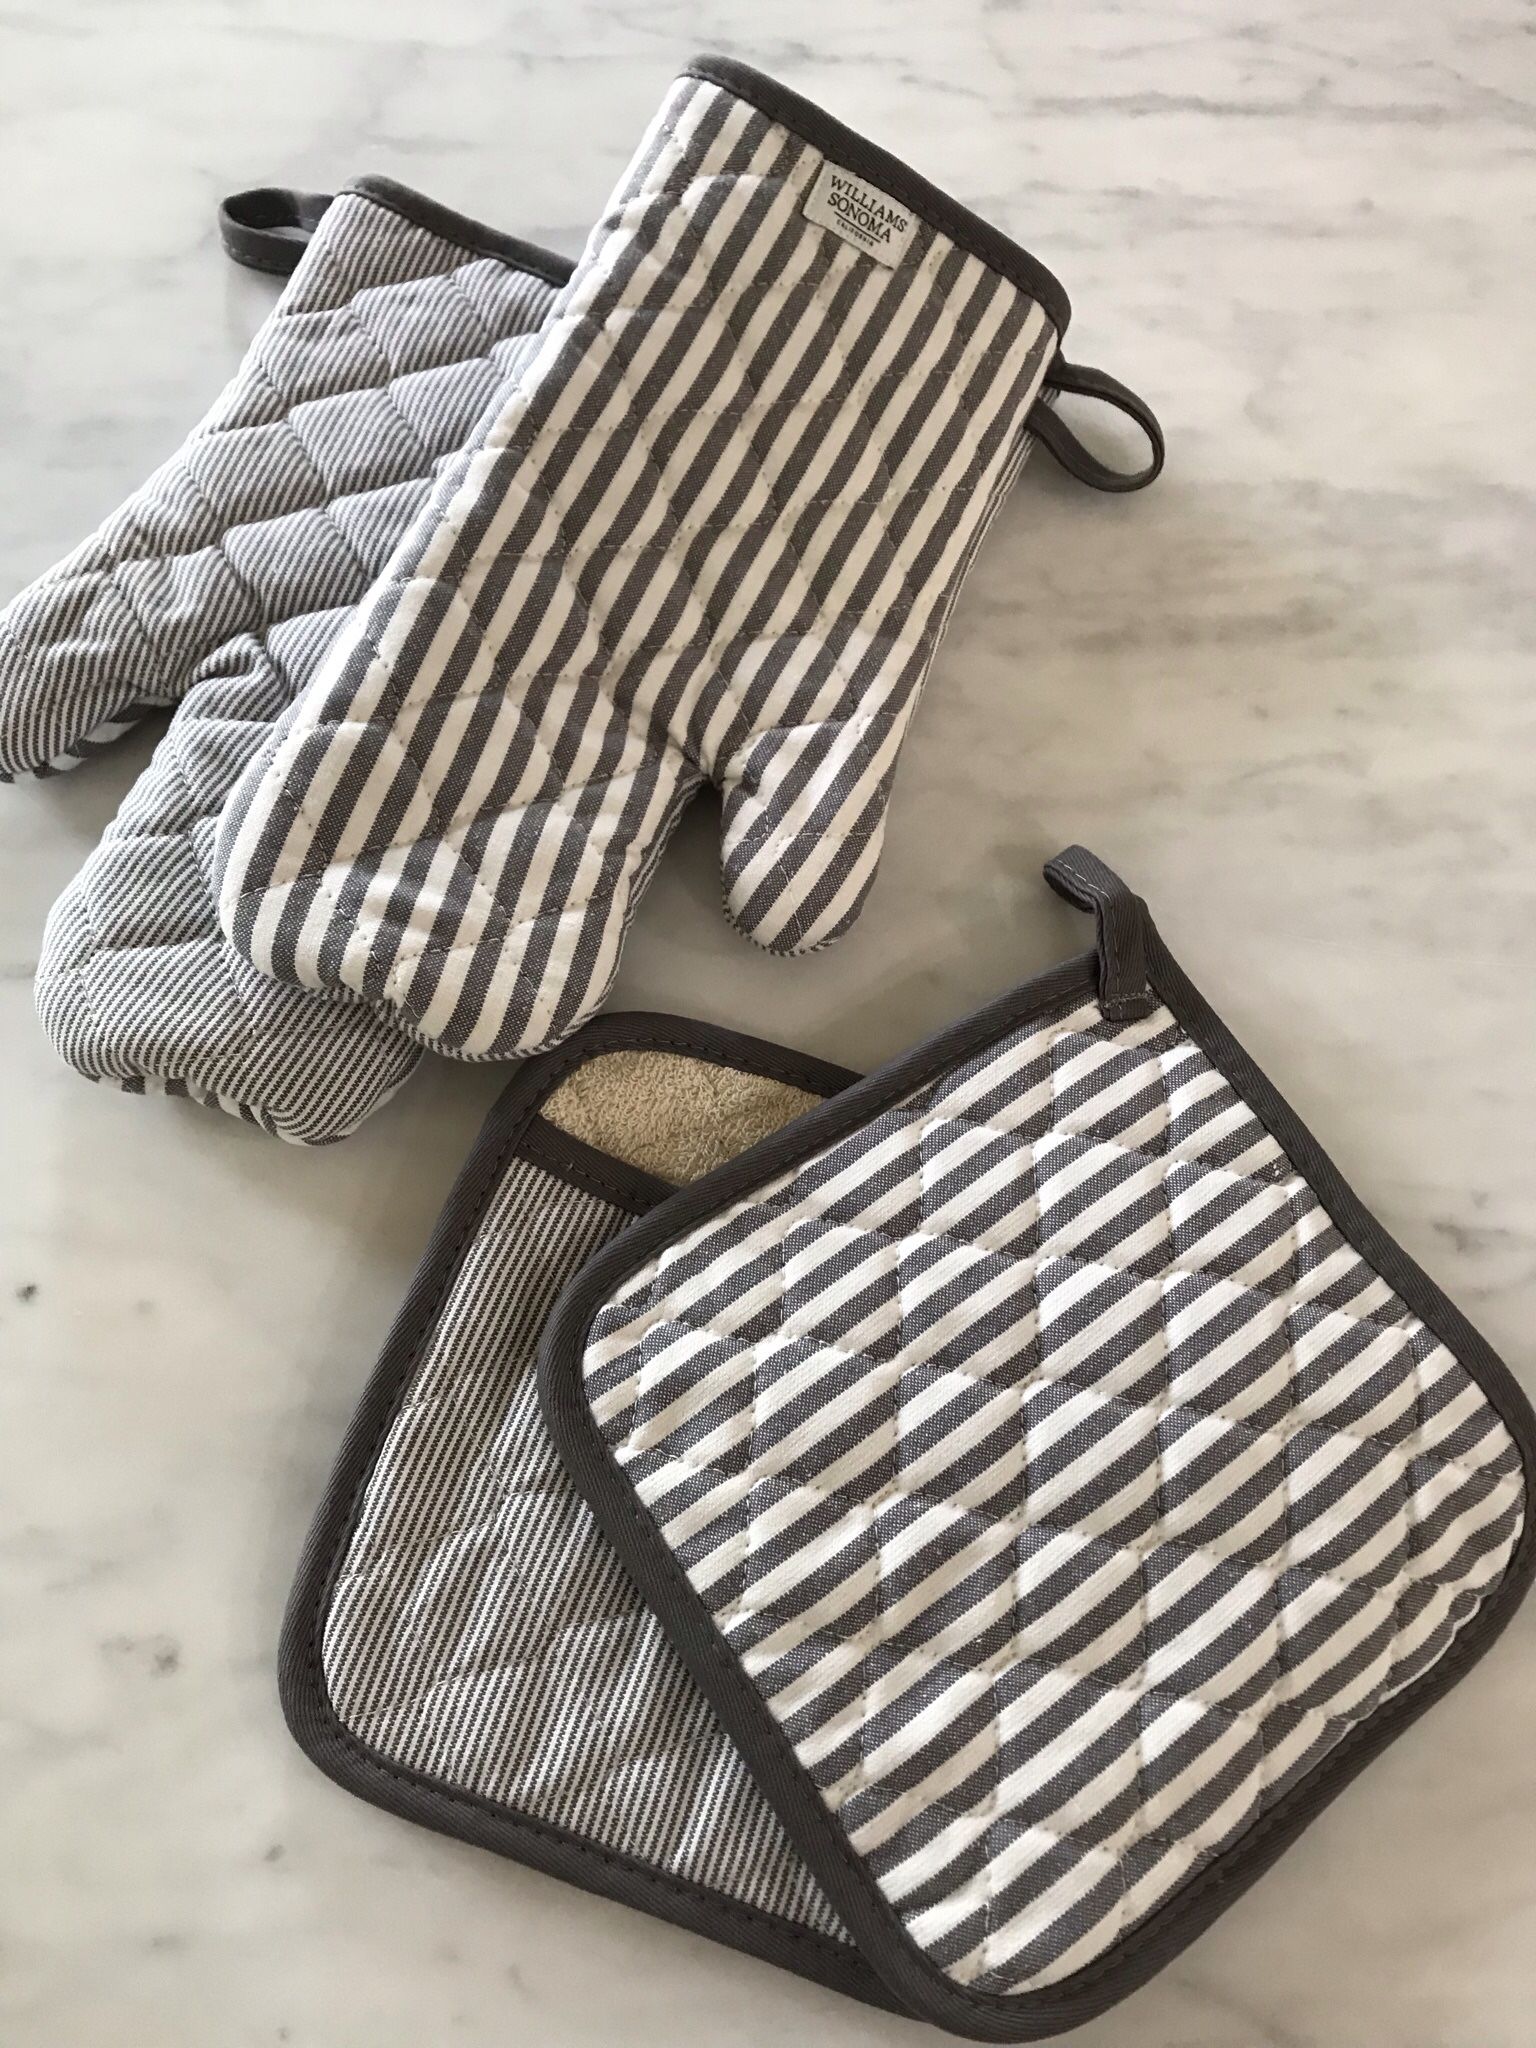 brand new williams-sonoma oven mitts and pot holders!!